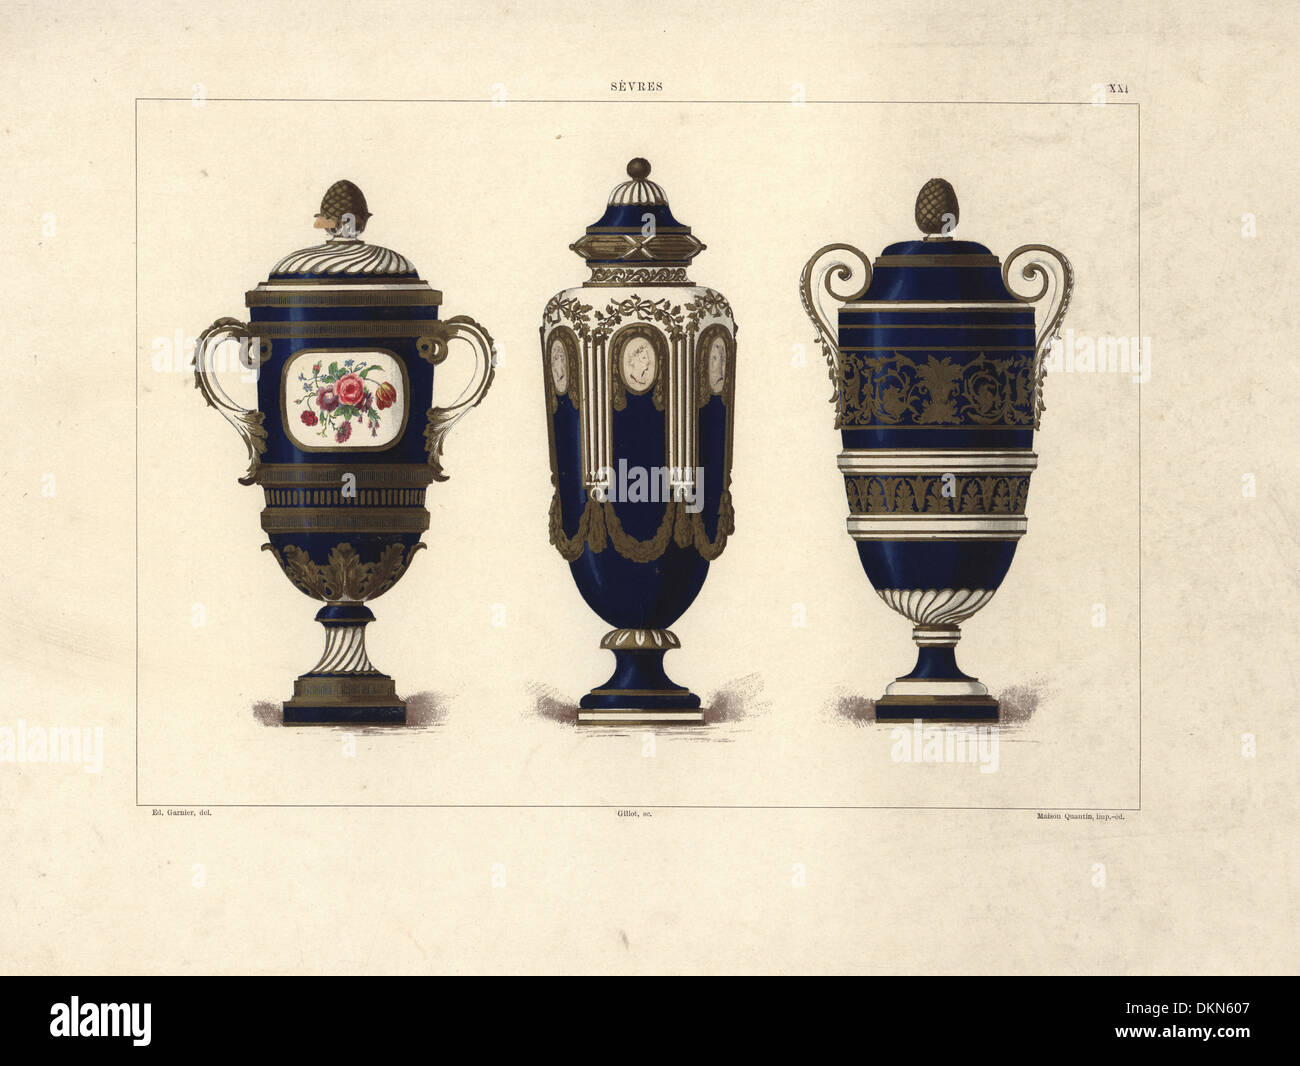 Sevres vases with roses, cameo portraits, and frieze. Stock Photo